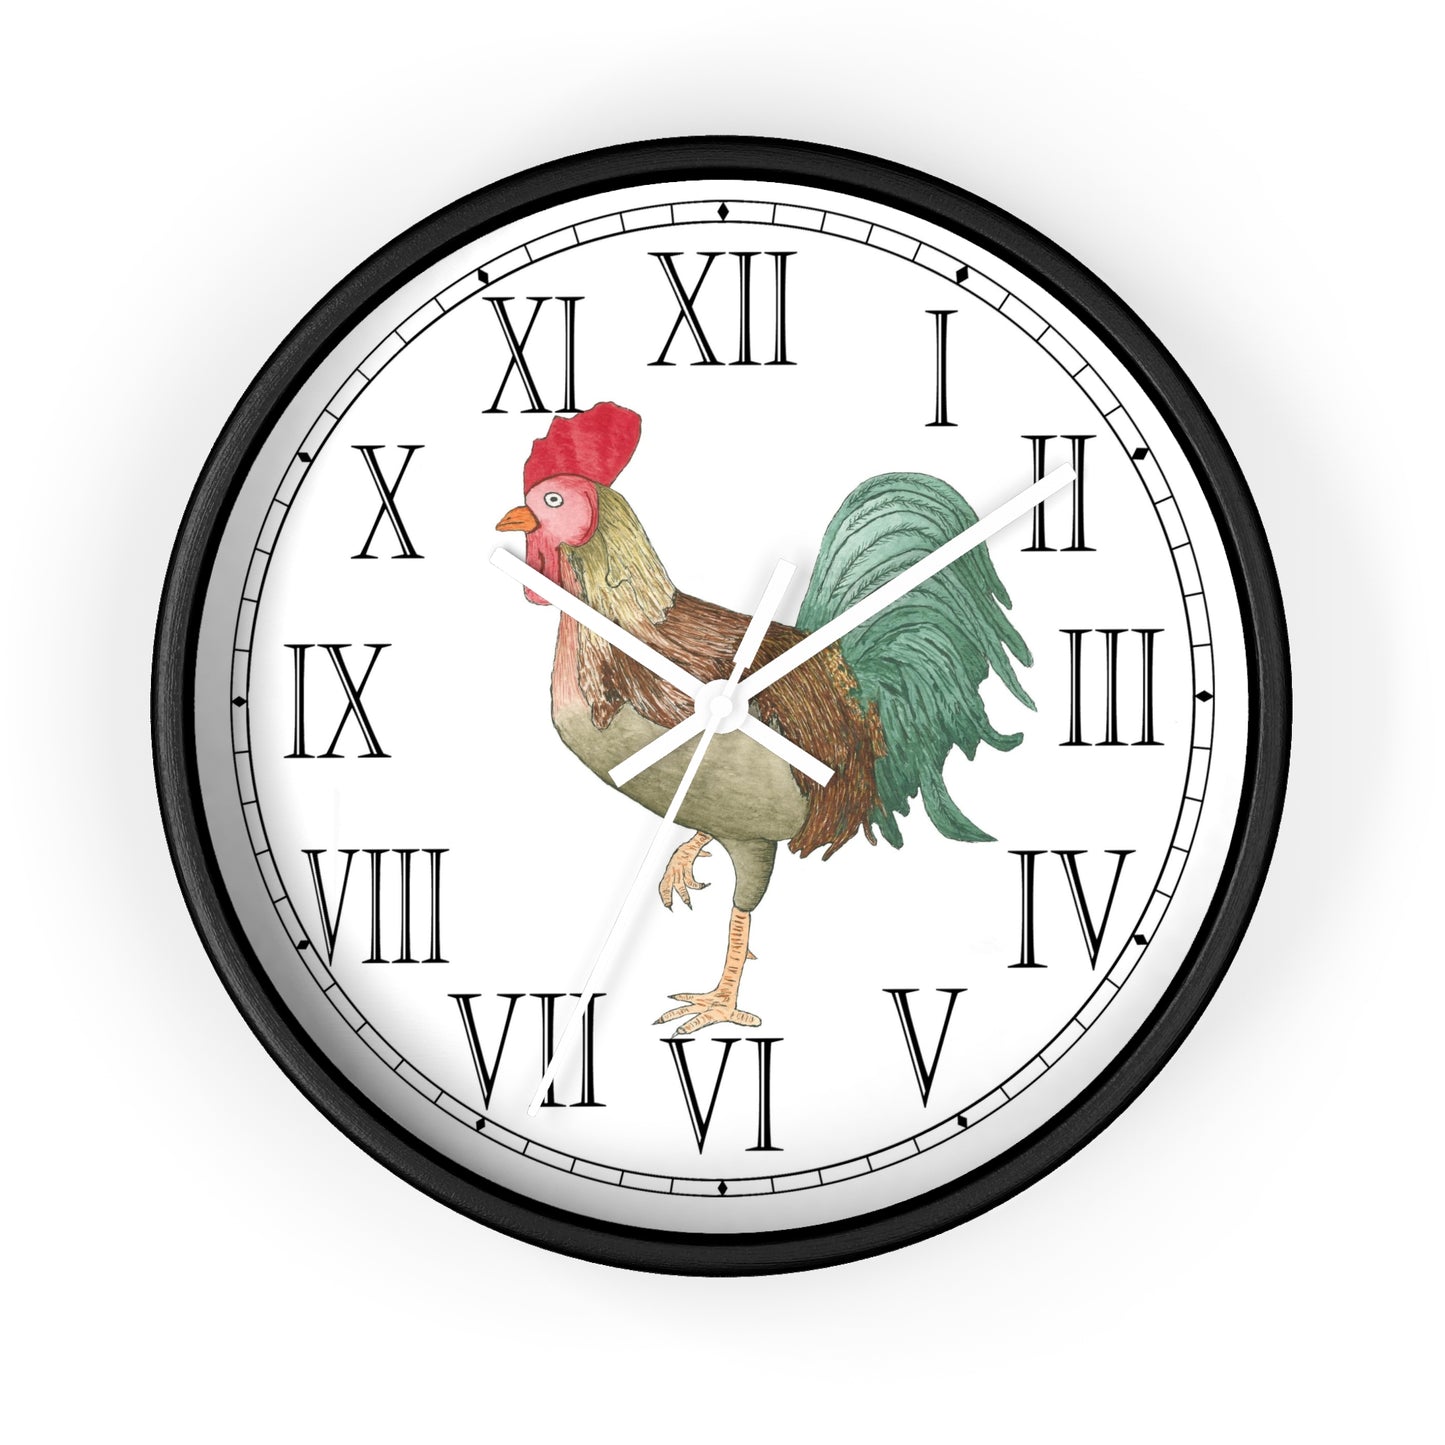 Michael Rooster Roman Numeral Clock